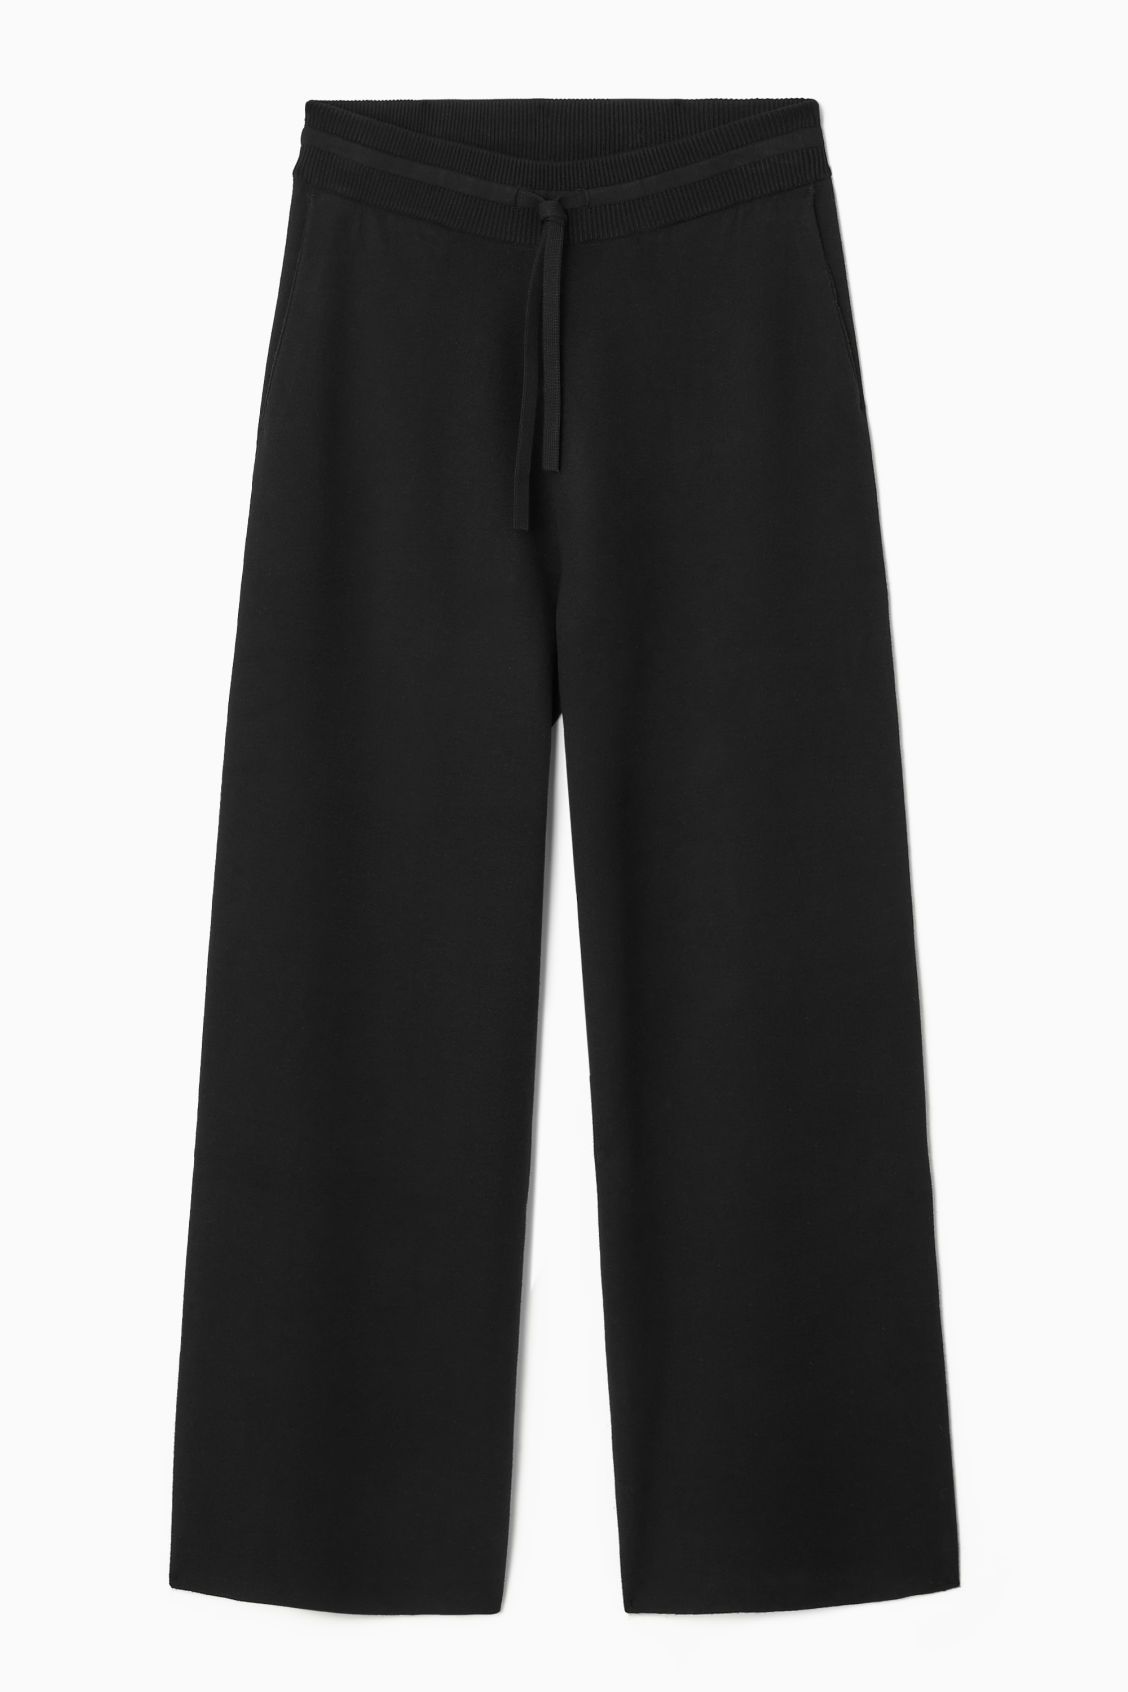 DOUBLE-FACED KNITTED JOGGERS - BLACK - COS | COS UK